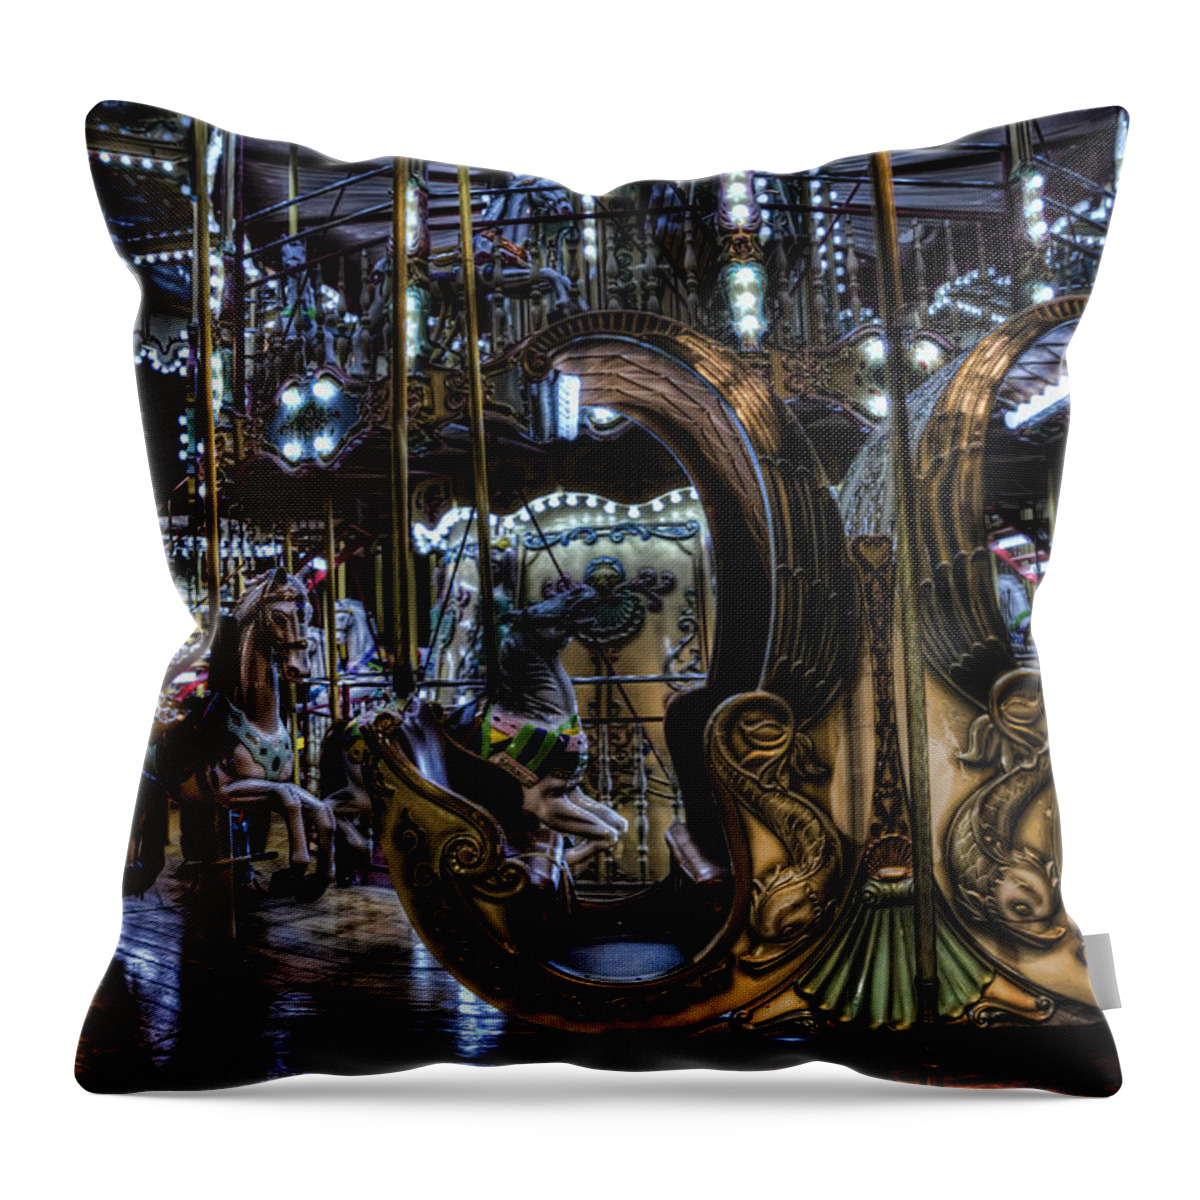 Arch Throw Pillow featuring the photograph Carousel at Night by Evie Carrier